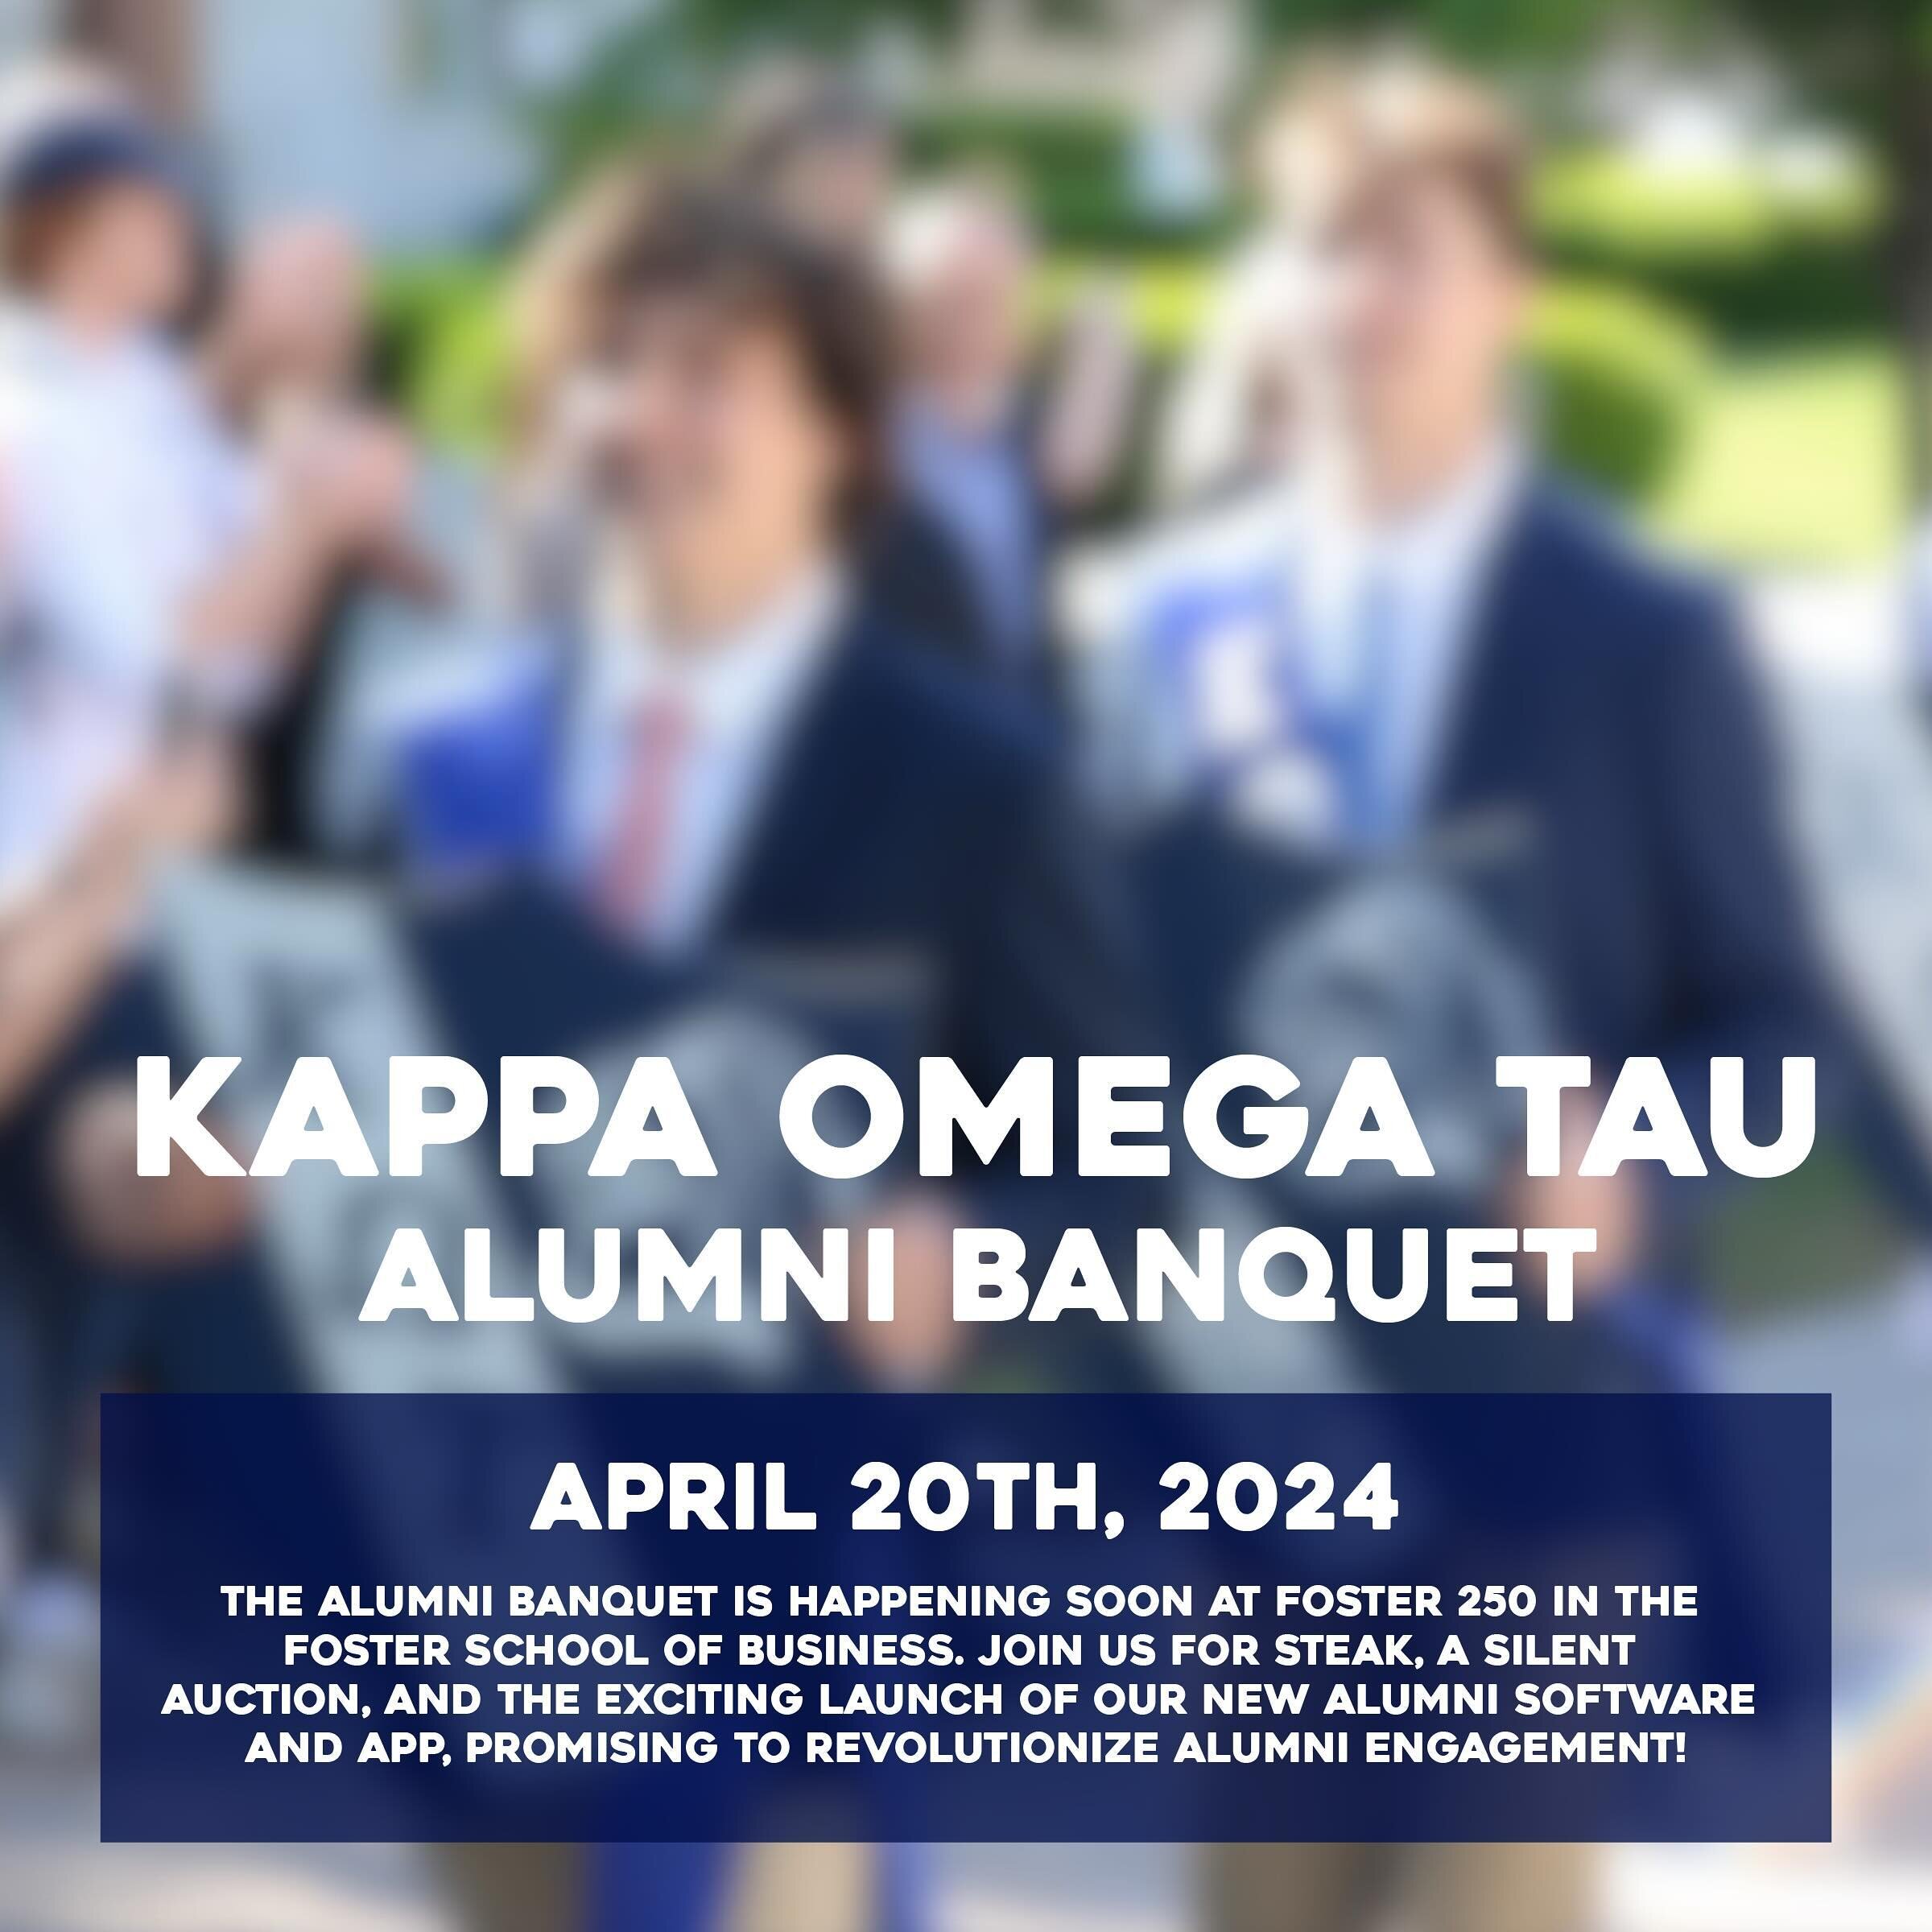 Join us for the Kappa Omega Tau Alumni Banquet April 20th, 2024. We hope to see you all there! 

Purchase banquet seat here- 

https://kappaomegatau.squarespace.com/kot-alumni-golf-tournamentandbanquet-2024

#gorags